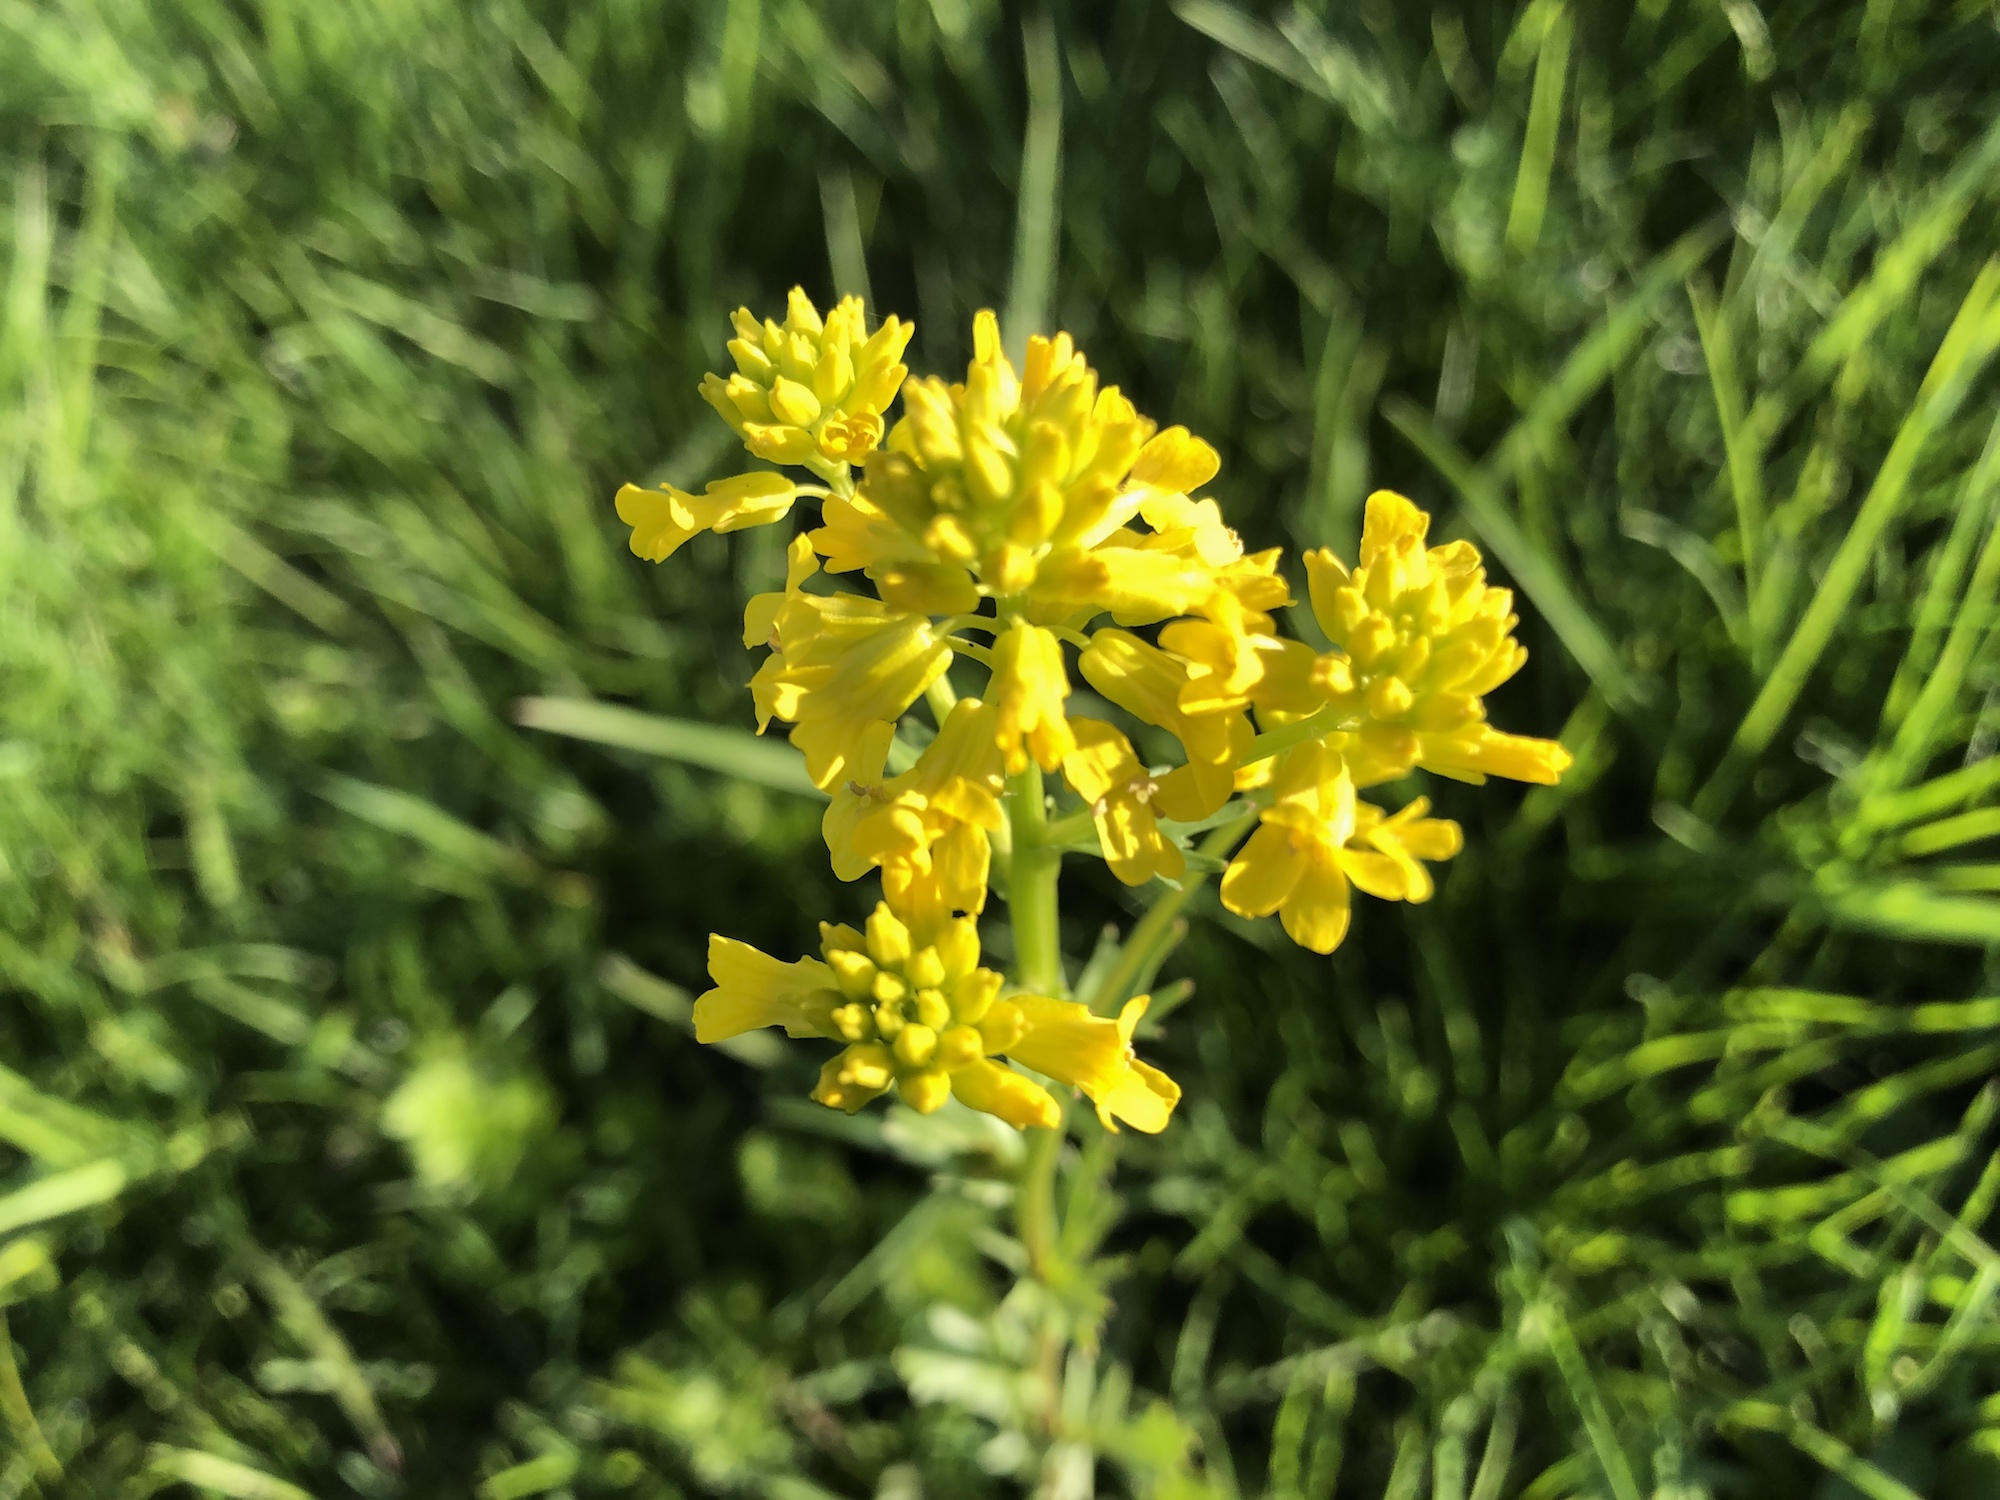 Garden Yellow Rocket in woods between Marion Dunn and Oak Savanna in Madison, Wisconsin on May 6, 2020.